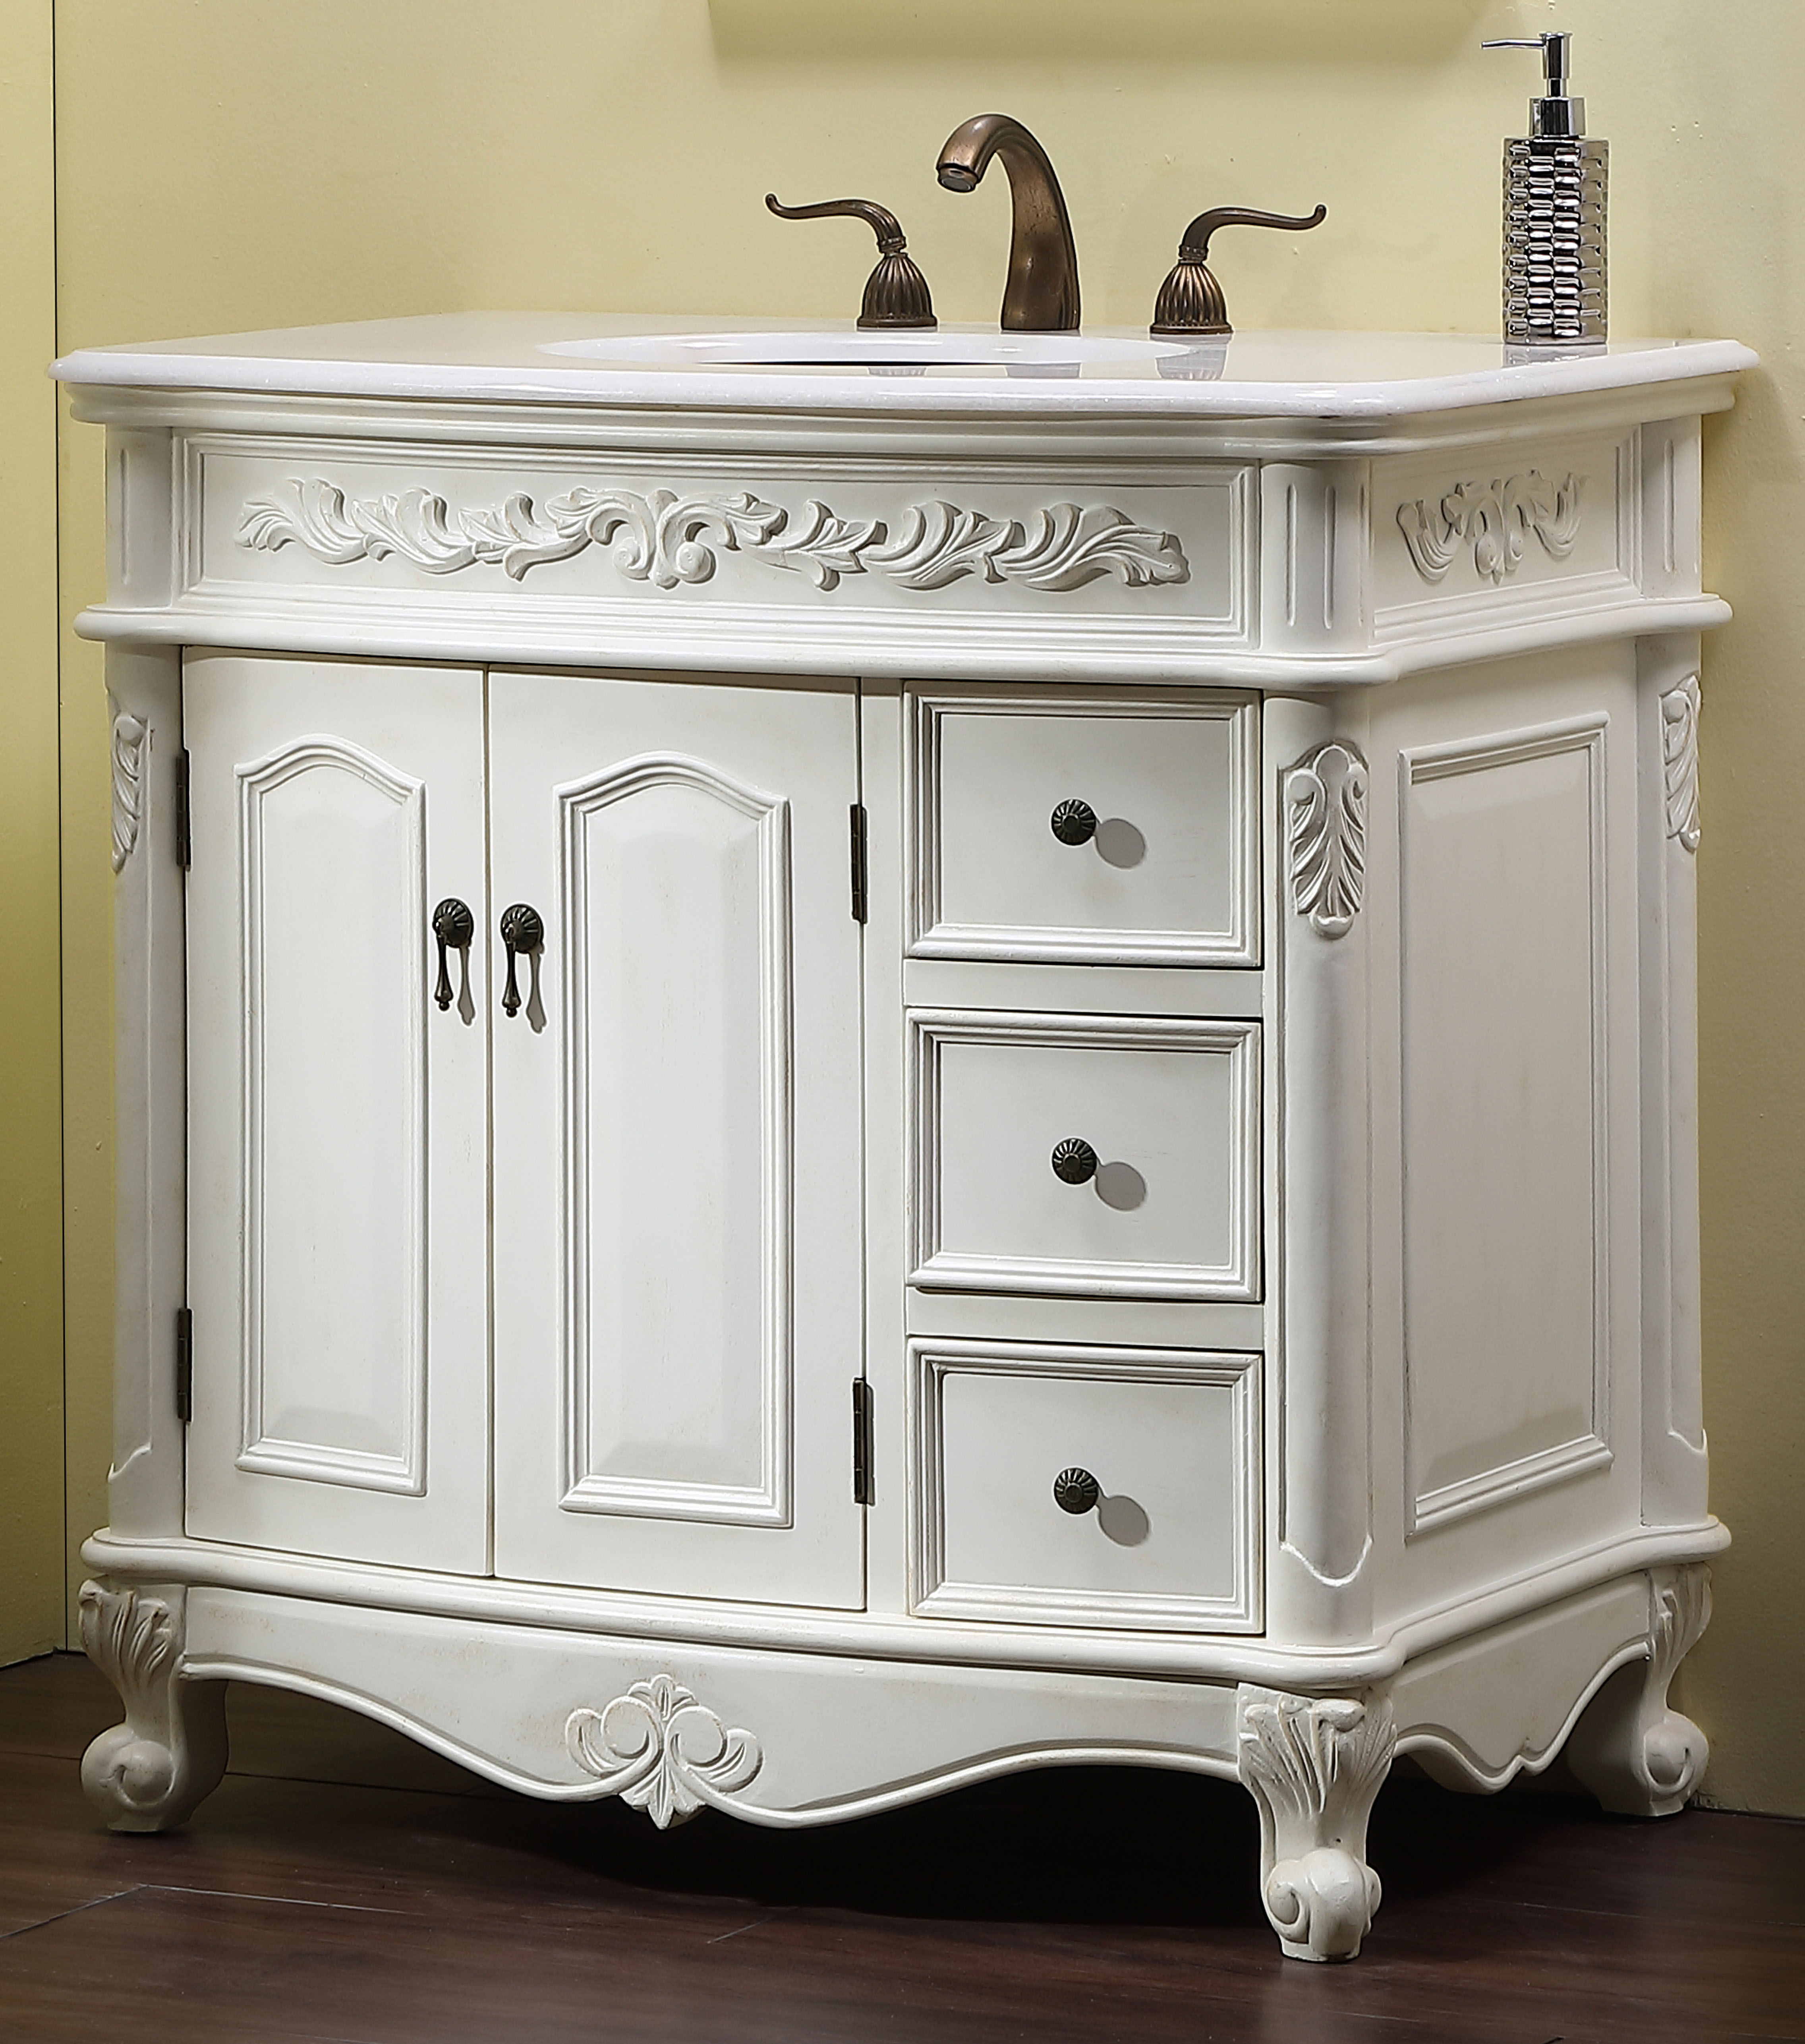 36" Antique White Finish Vanity with Victorian Style Leg